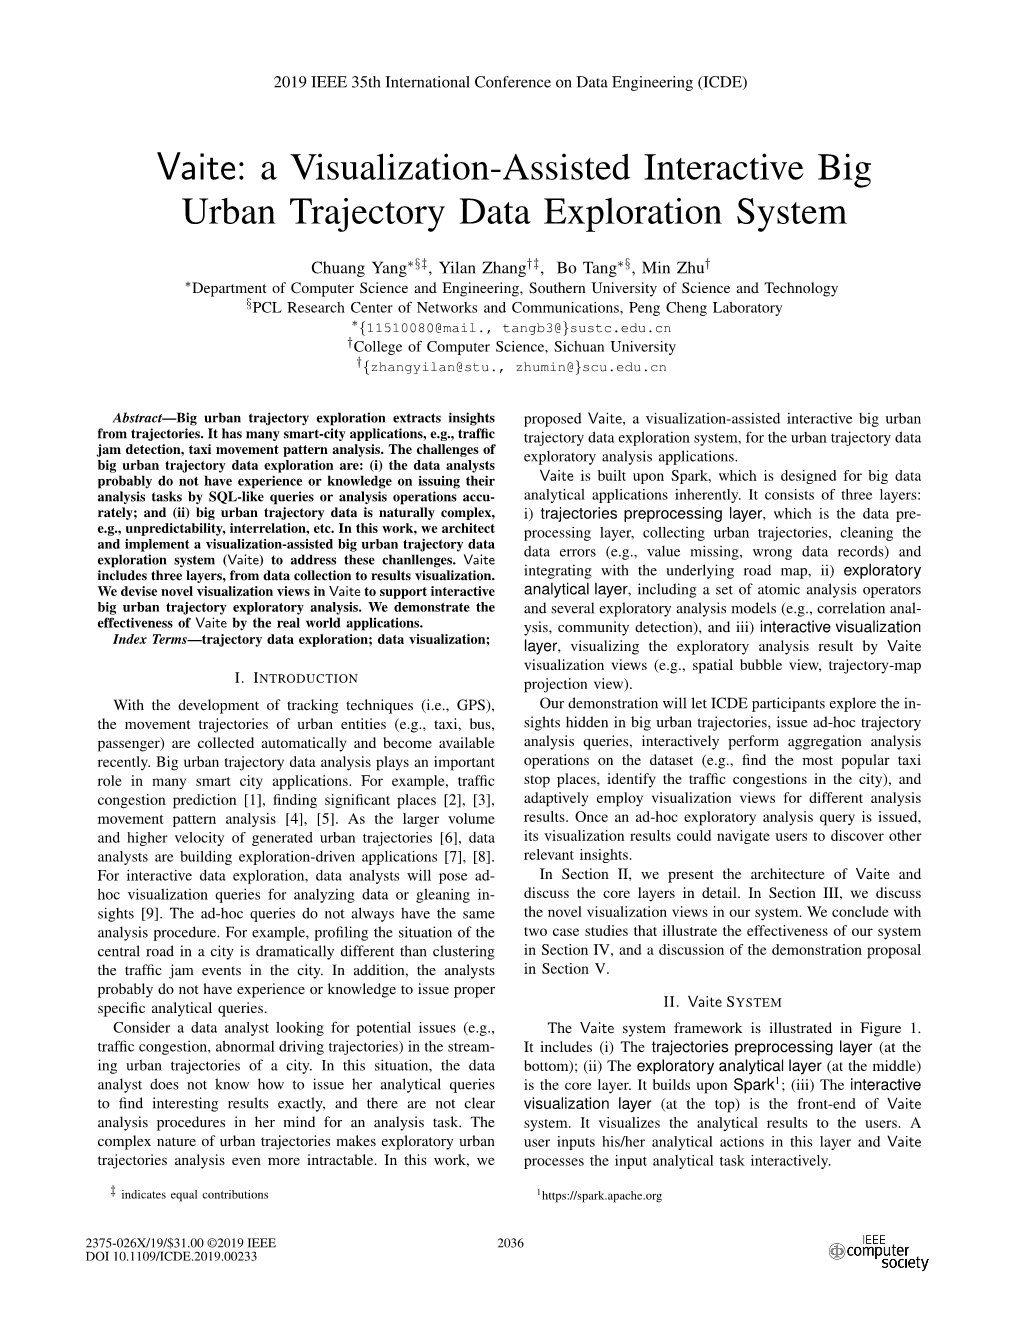 Vaite: a Visualization-Assisted Interactive Big Urban Trajectory Data Exploration System